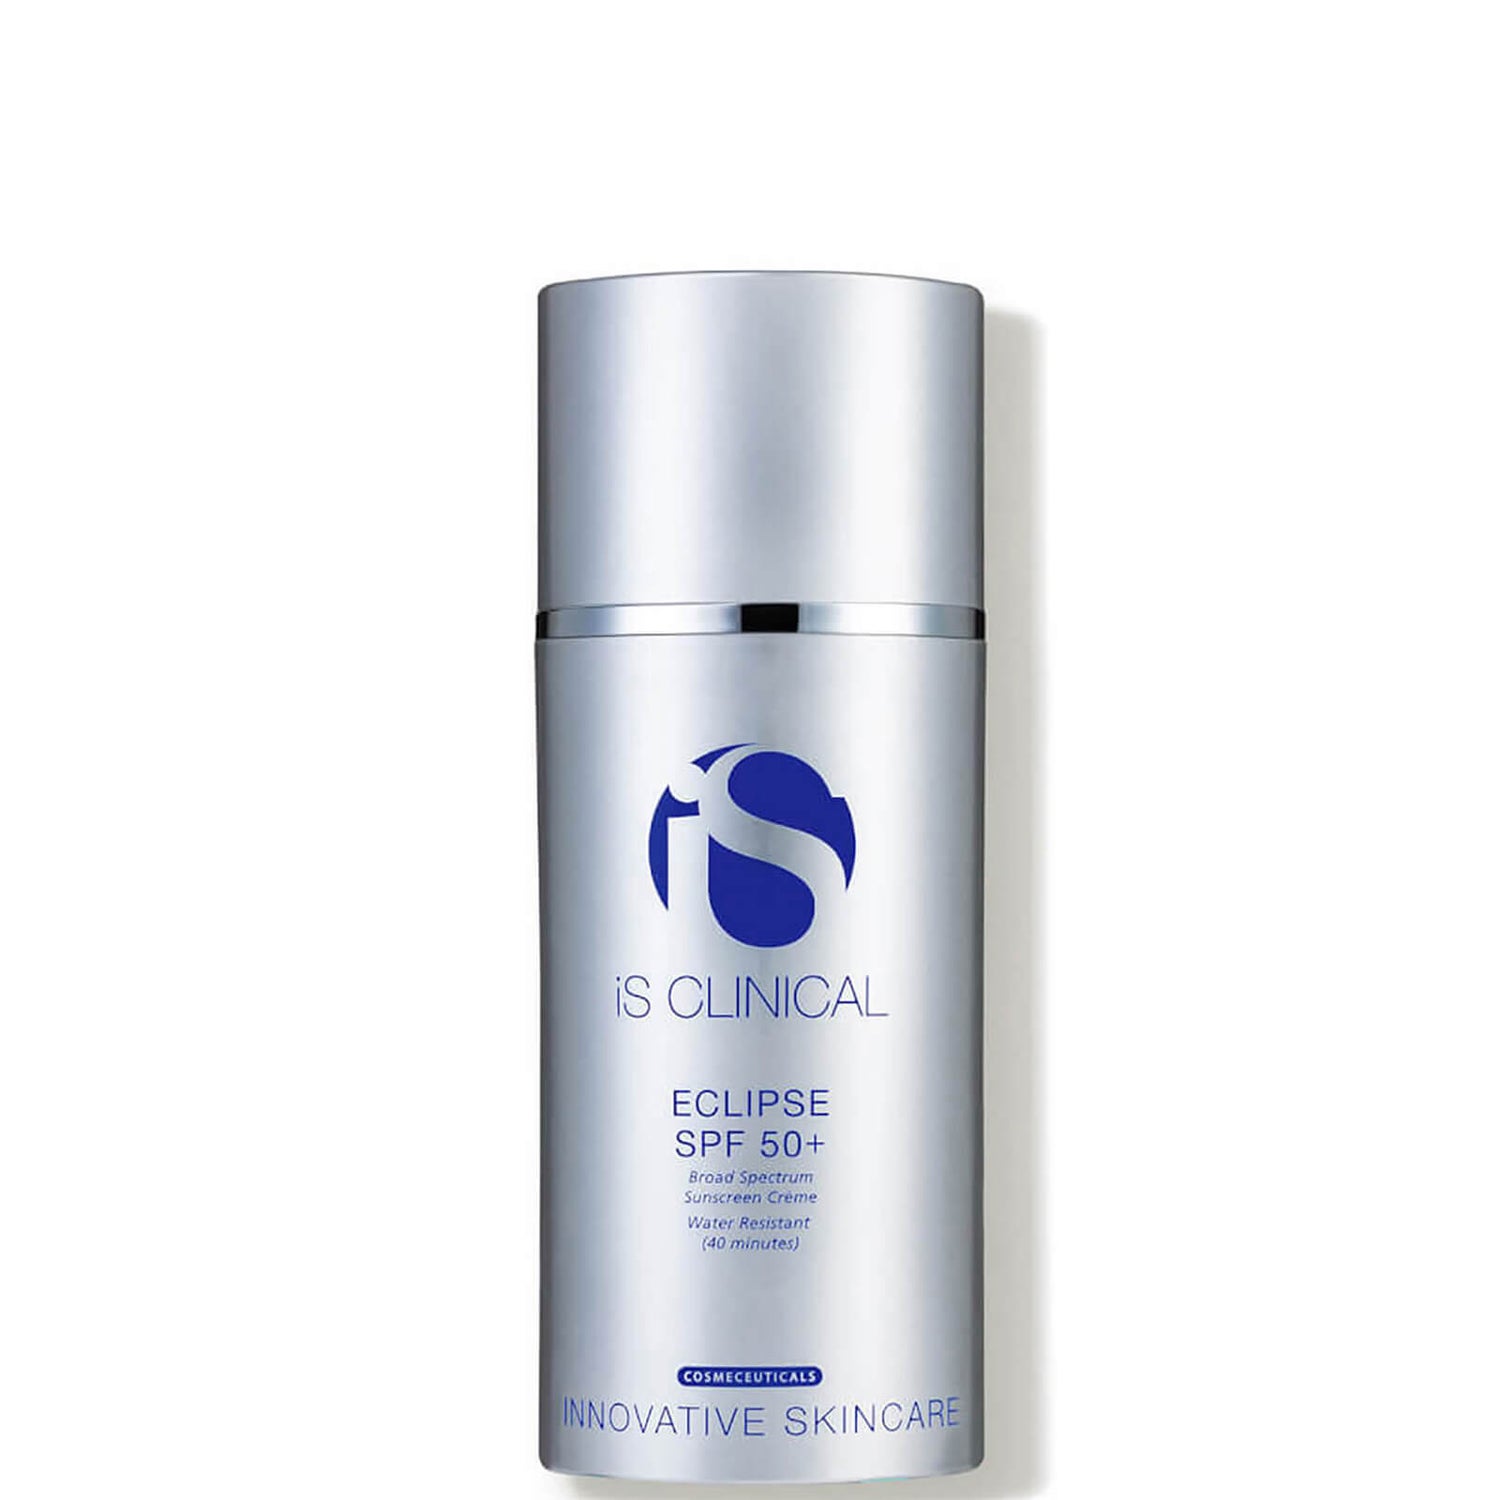 iS Clinical Eclipse SPF 50+ 3 oz